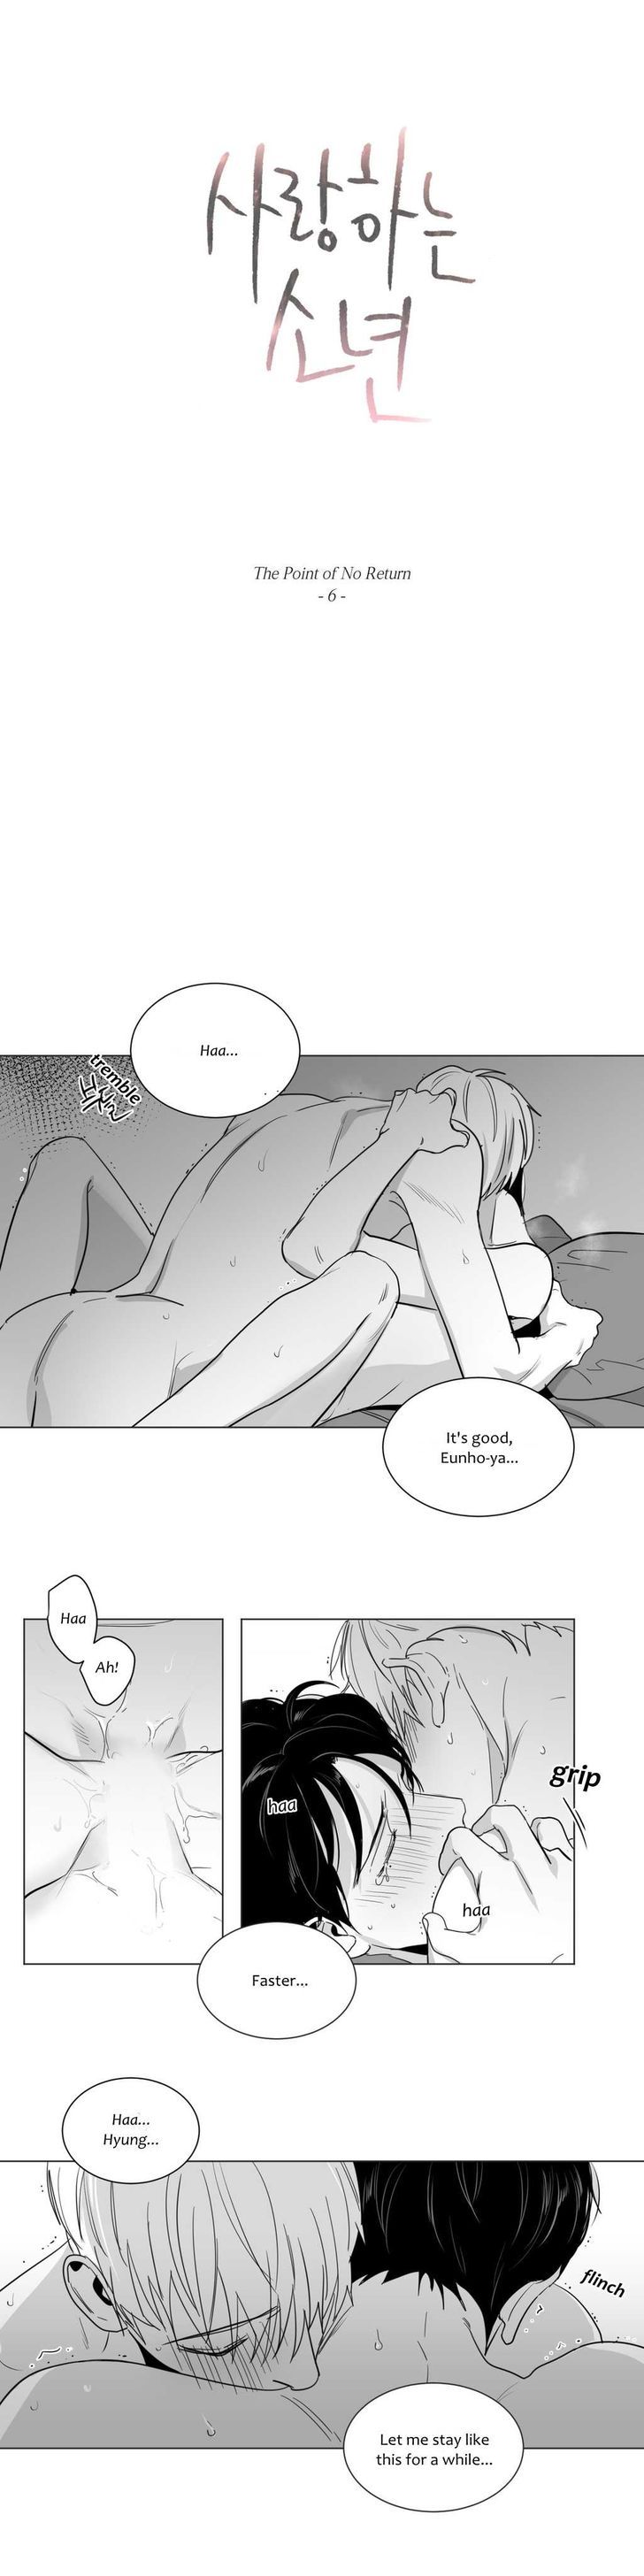 Lover Boy (Lezhin) Chapter 016 page 6